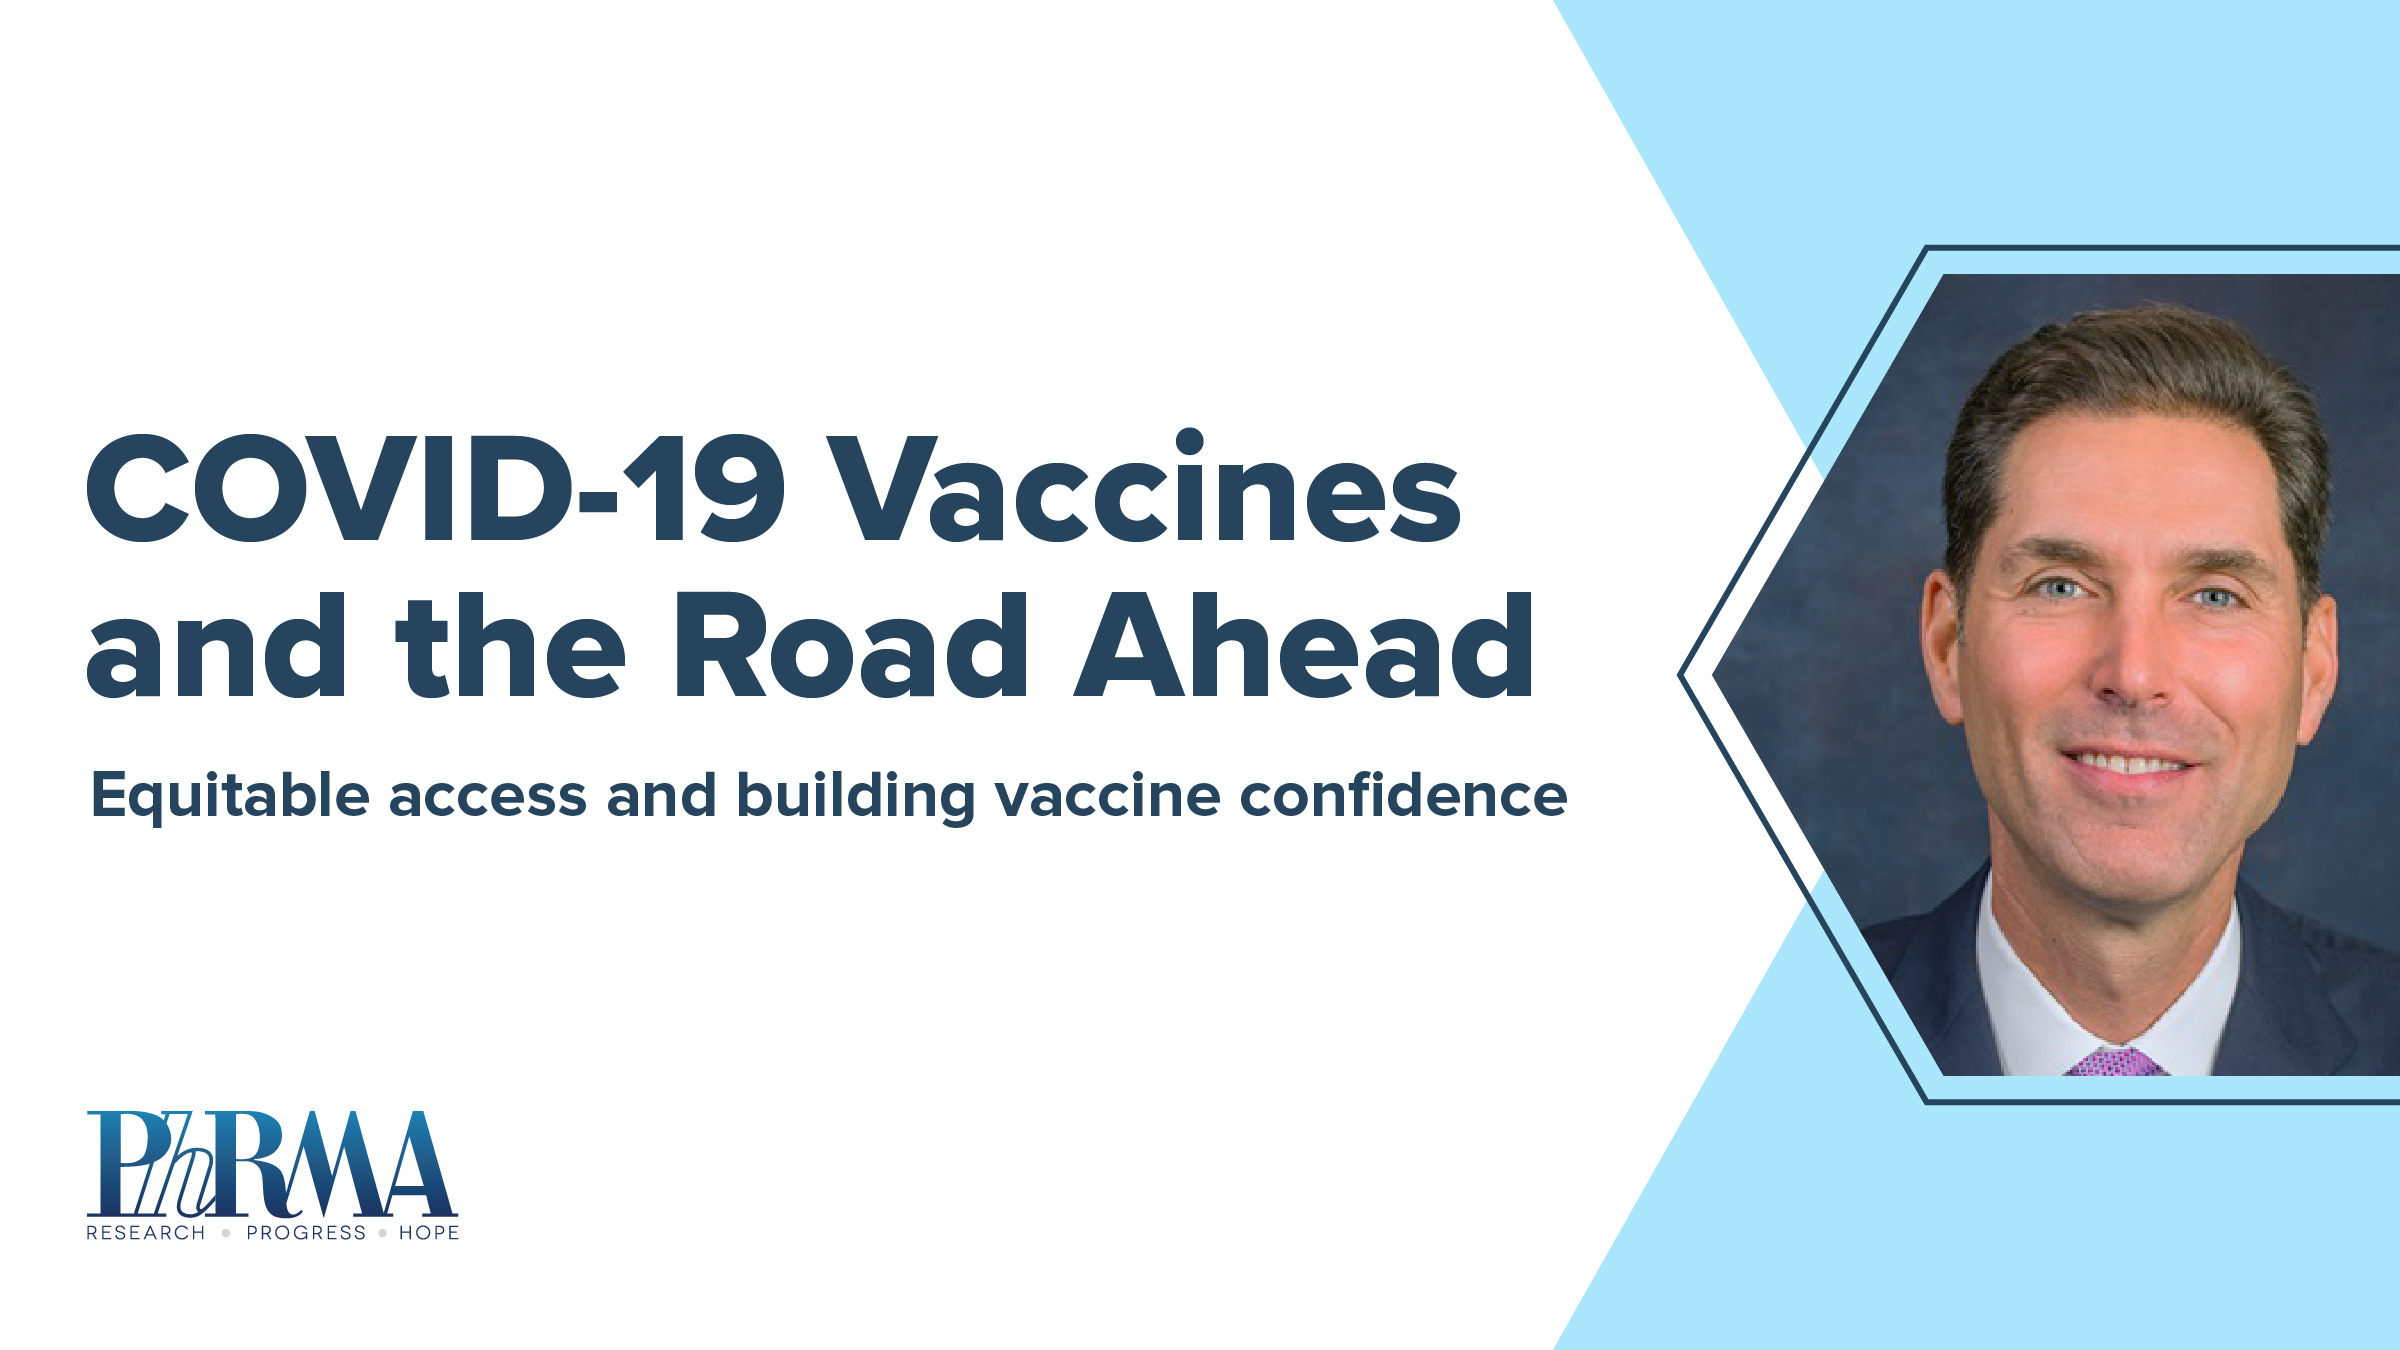 icymi-phrma-president-and-ceo-stephen-j-ubl-joins-other-industry-leaders-for-a-covid-19-vaccines-conversation-with-axios